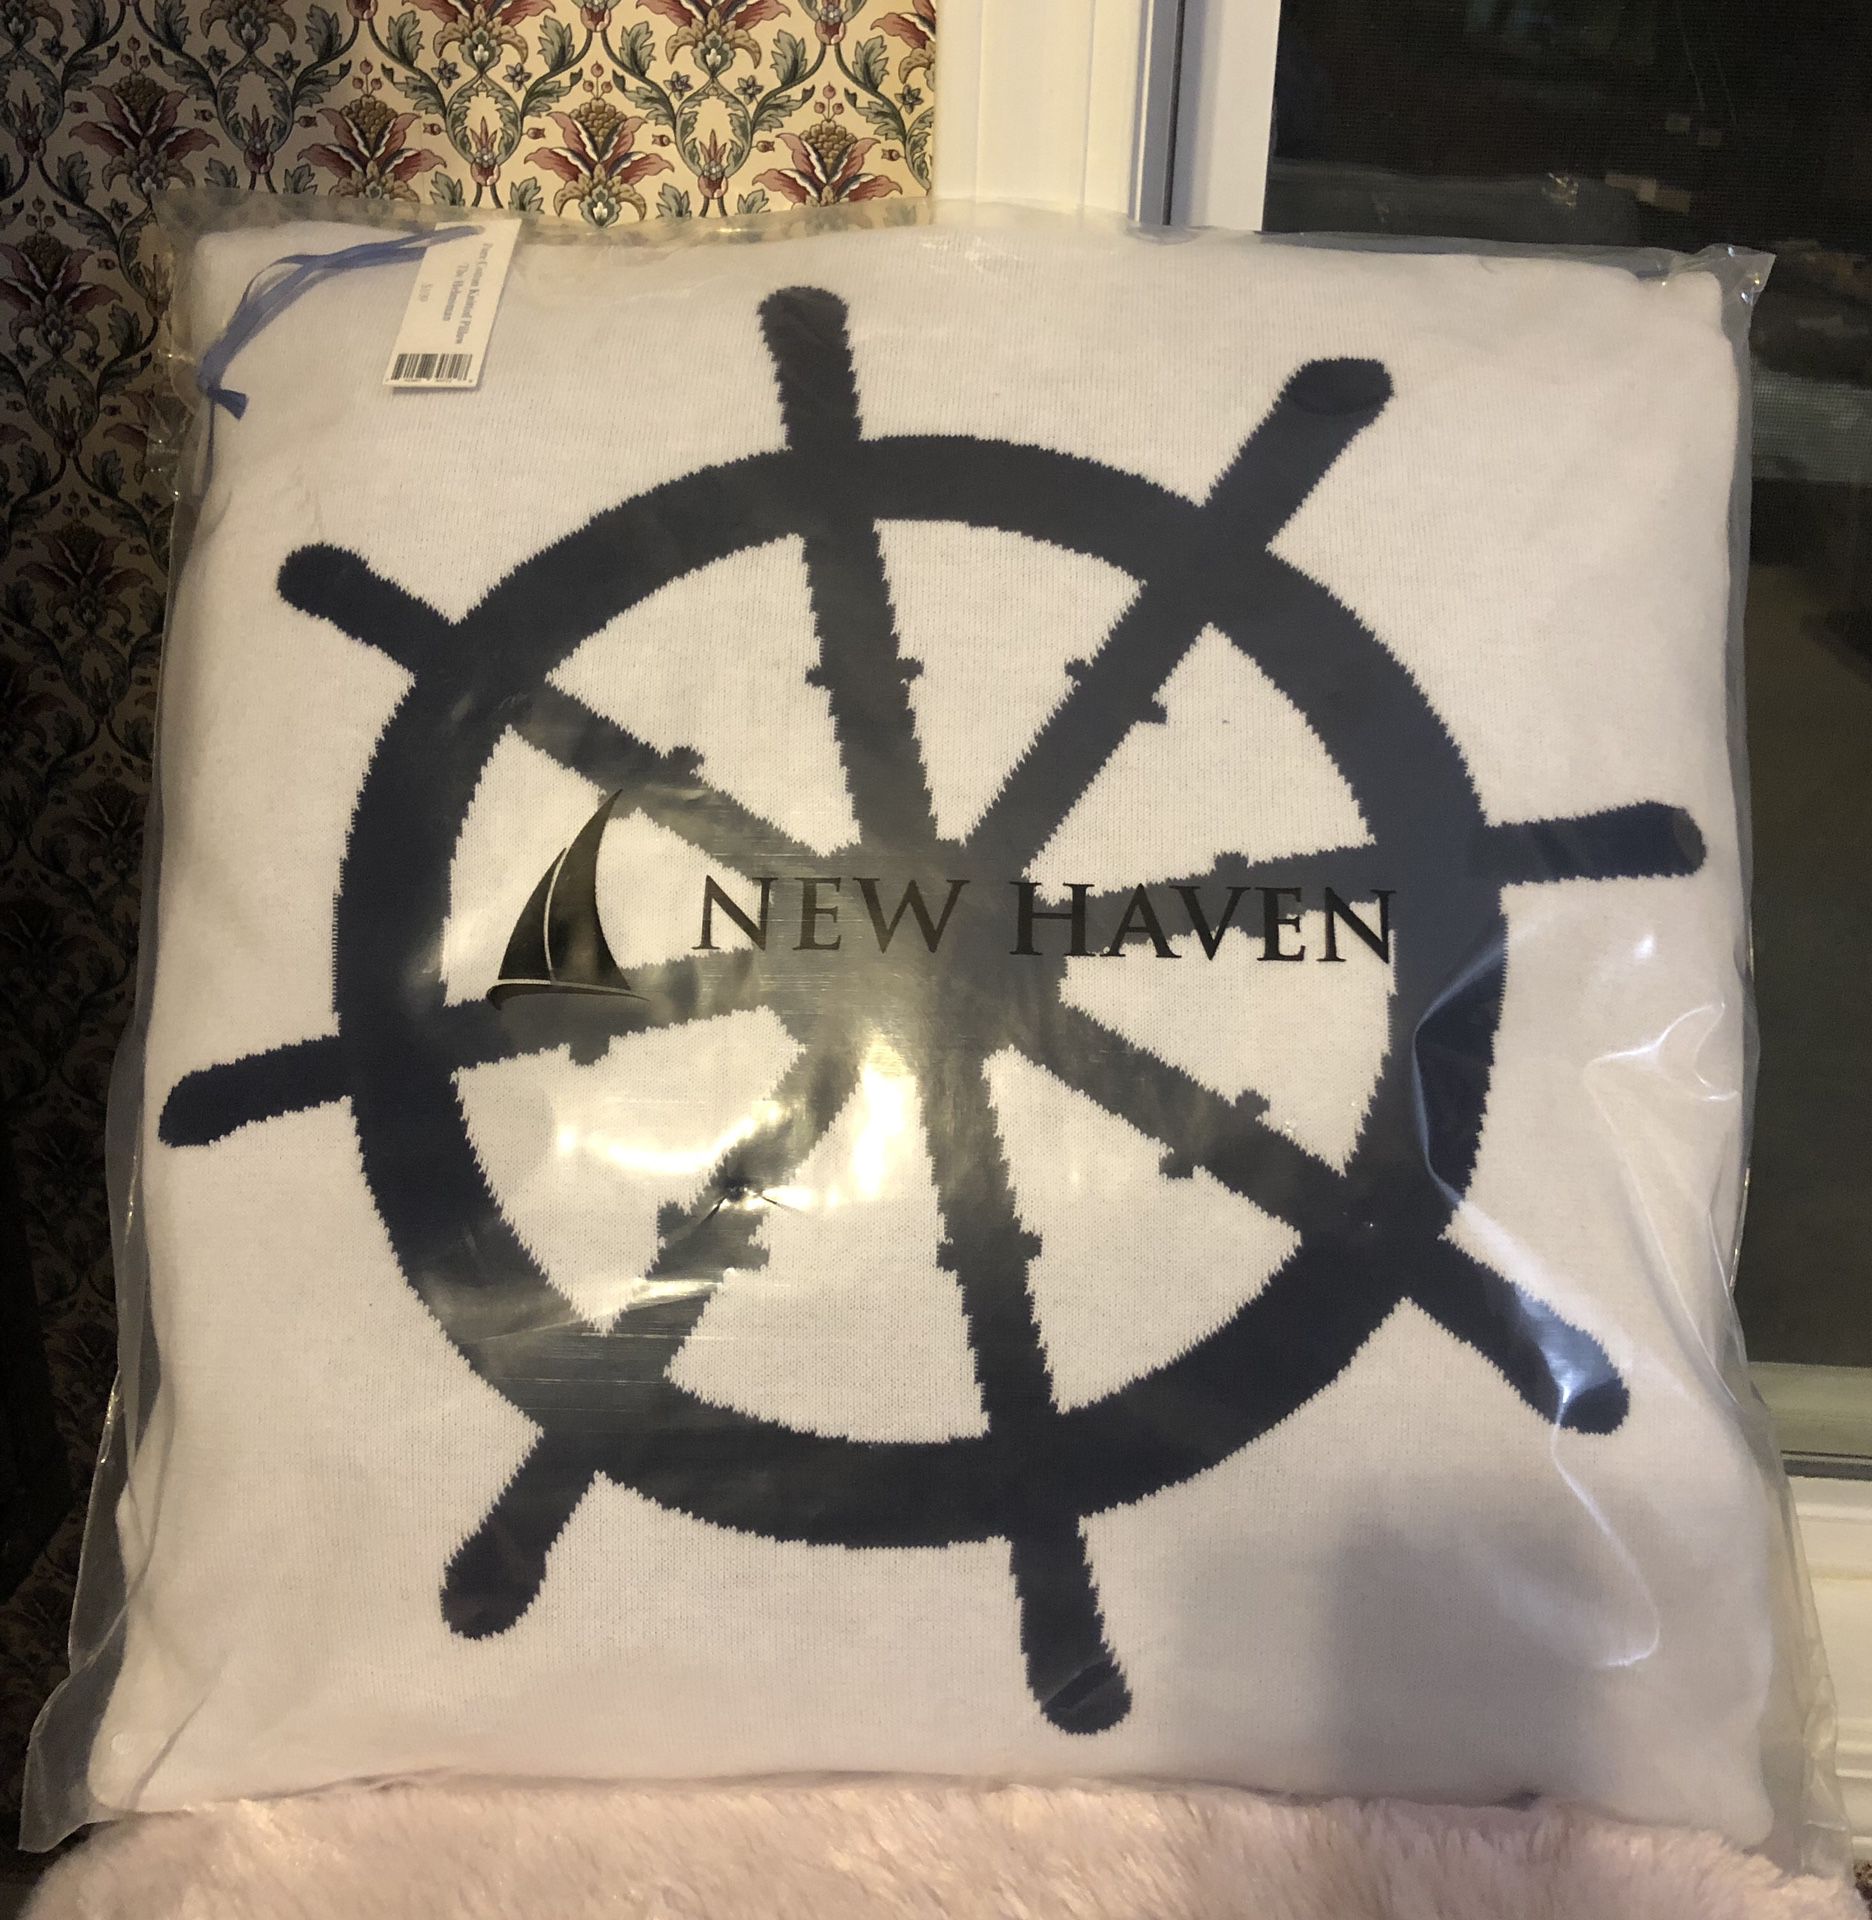 NEW - New Haven - Pure Cotton Knitted Pillow - The Helmsman. Retails for $108, Selling for ONLY $25!!